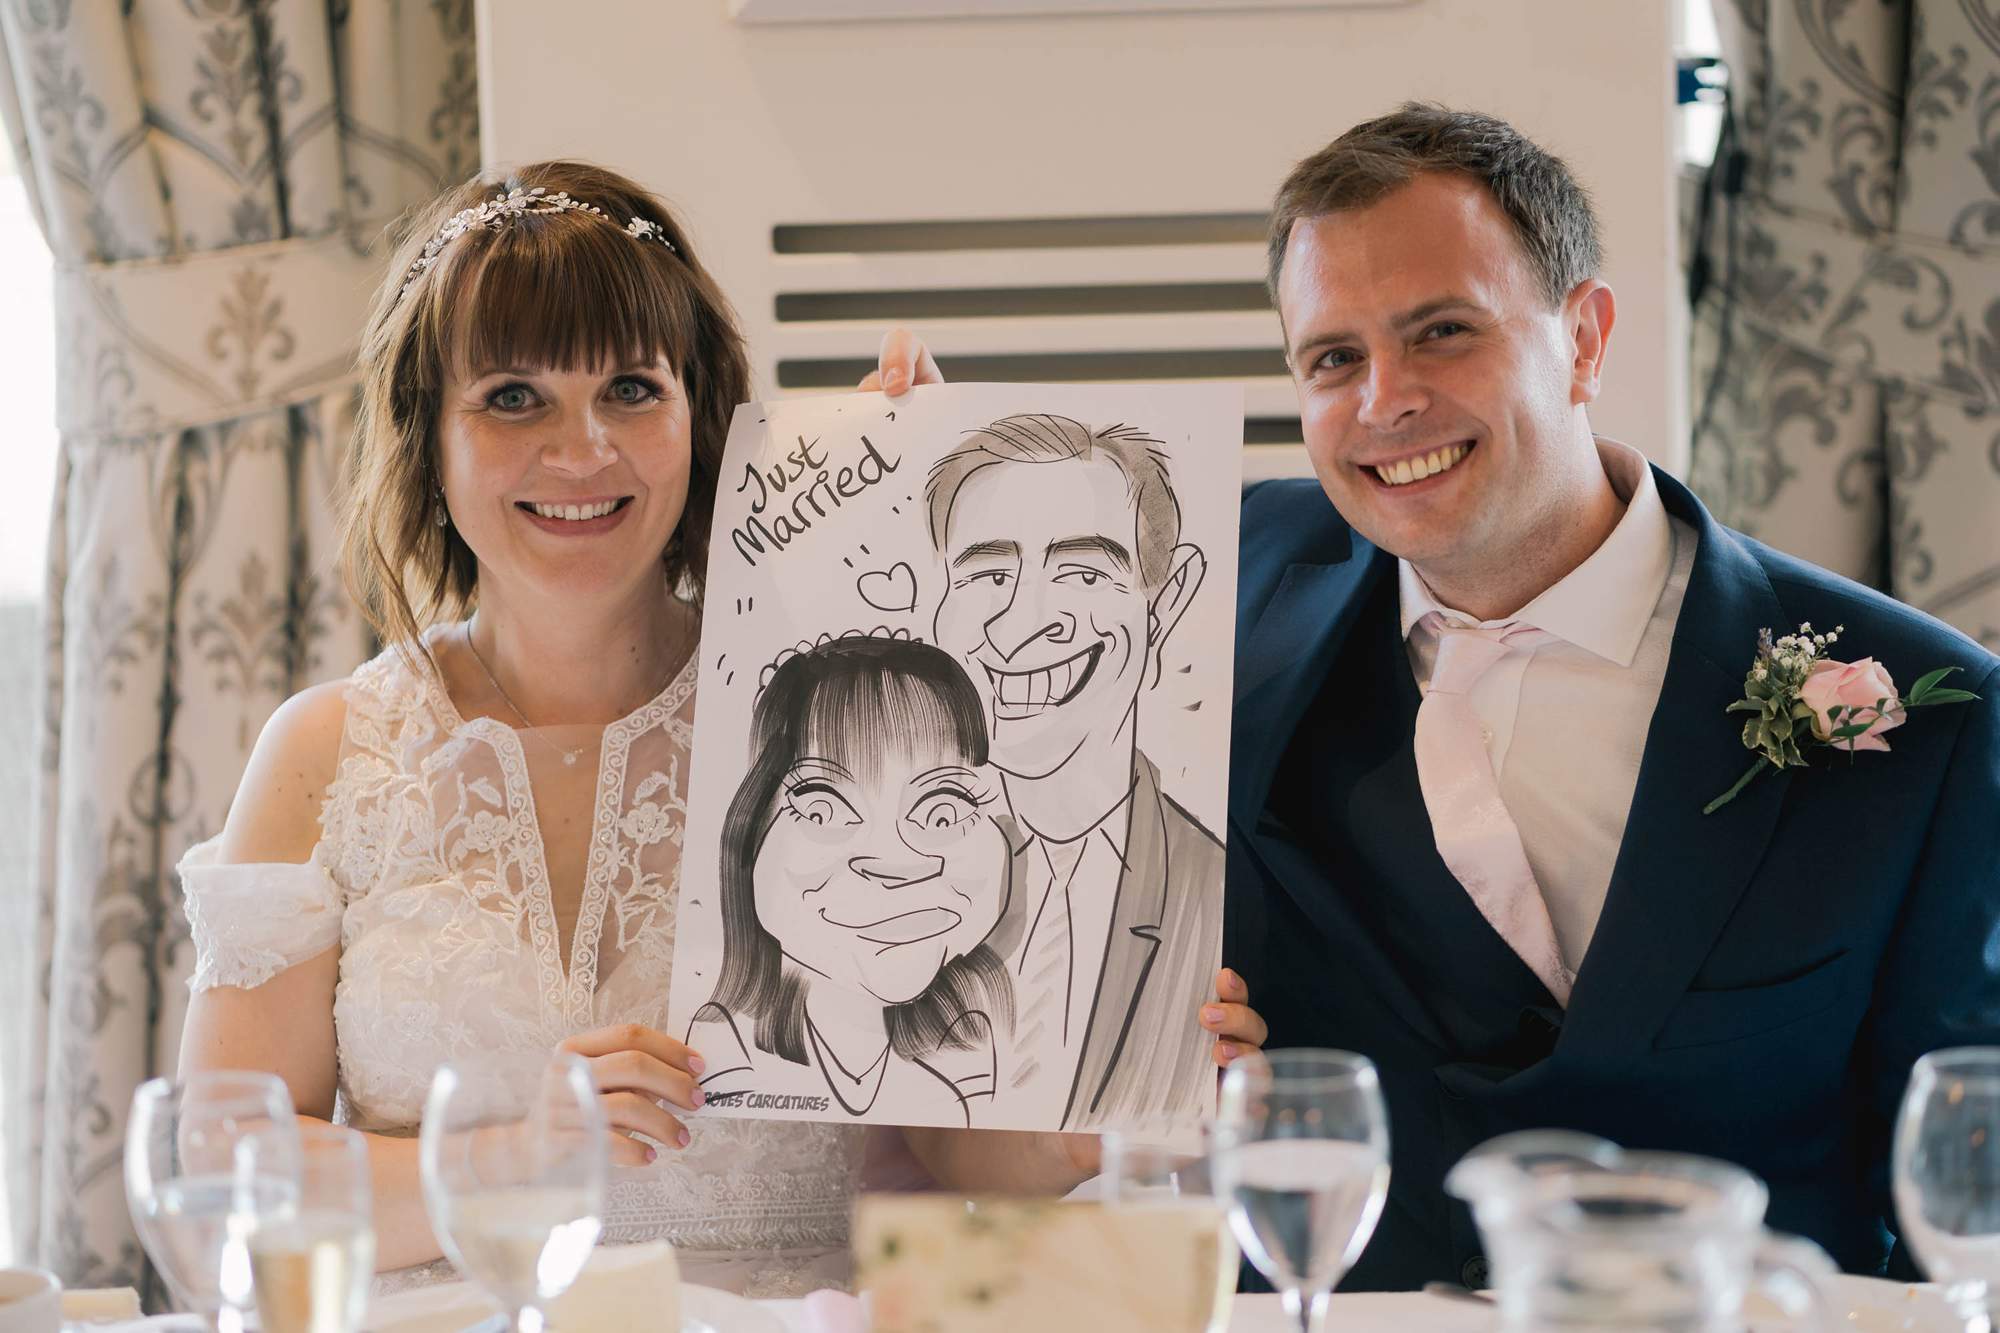 Newlyweds with a cartoon picture in their hands at the Hydro hotel.